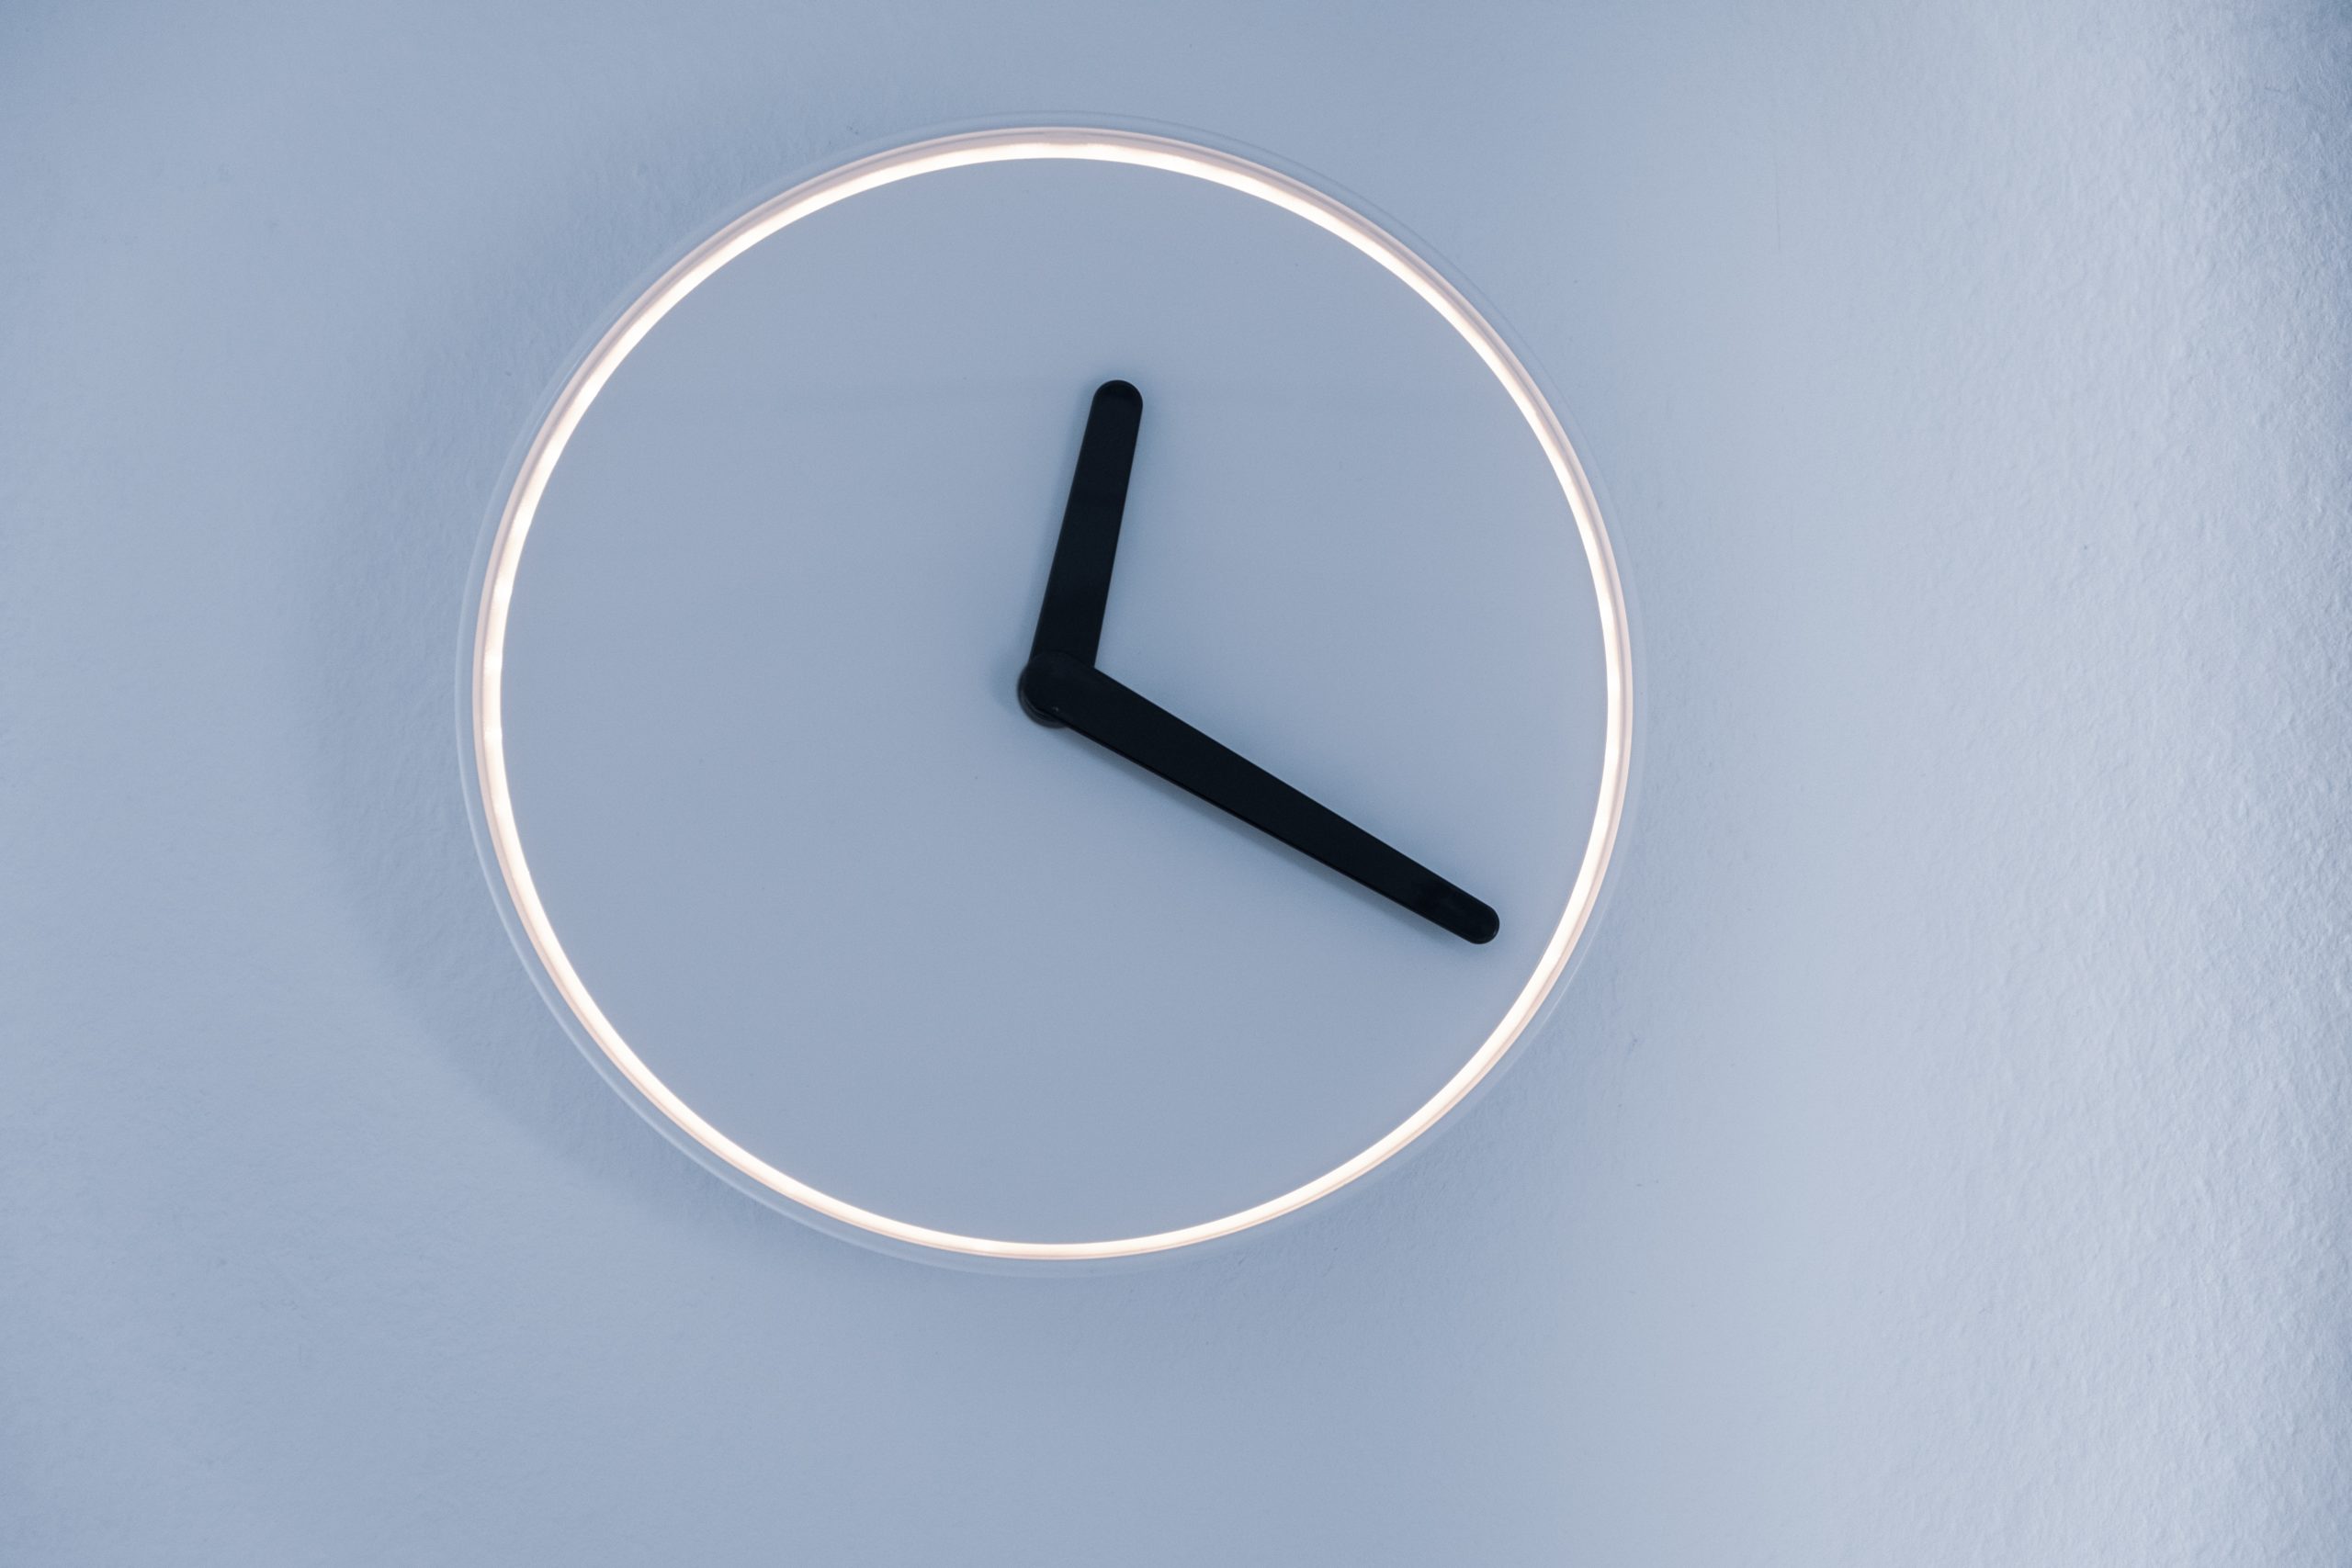 moritz kindler mGFHA 0TWnA unsplash scaled Everything You Need To Know About Intermittent Fasting